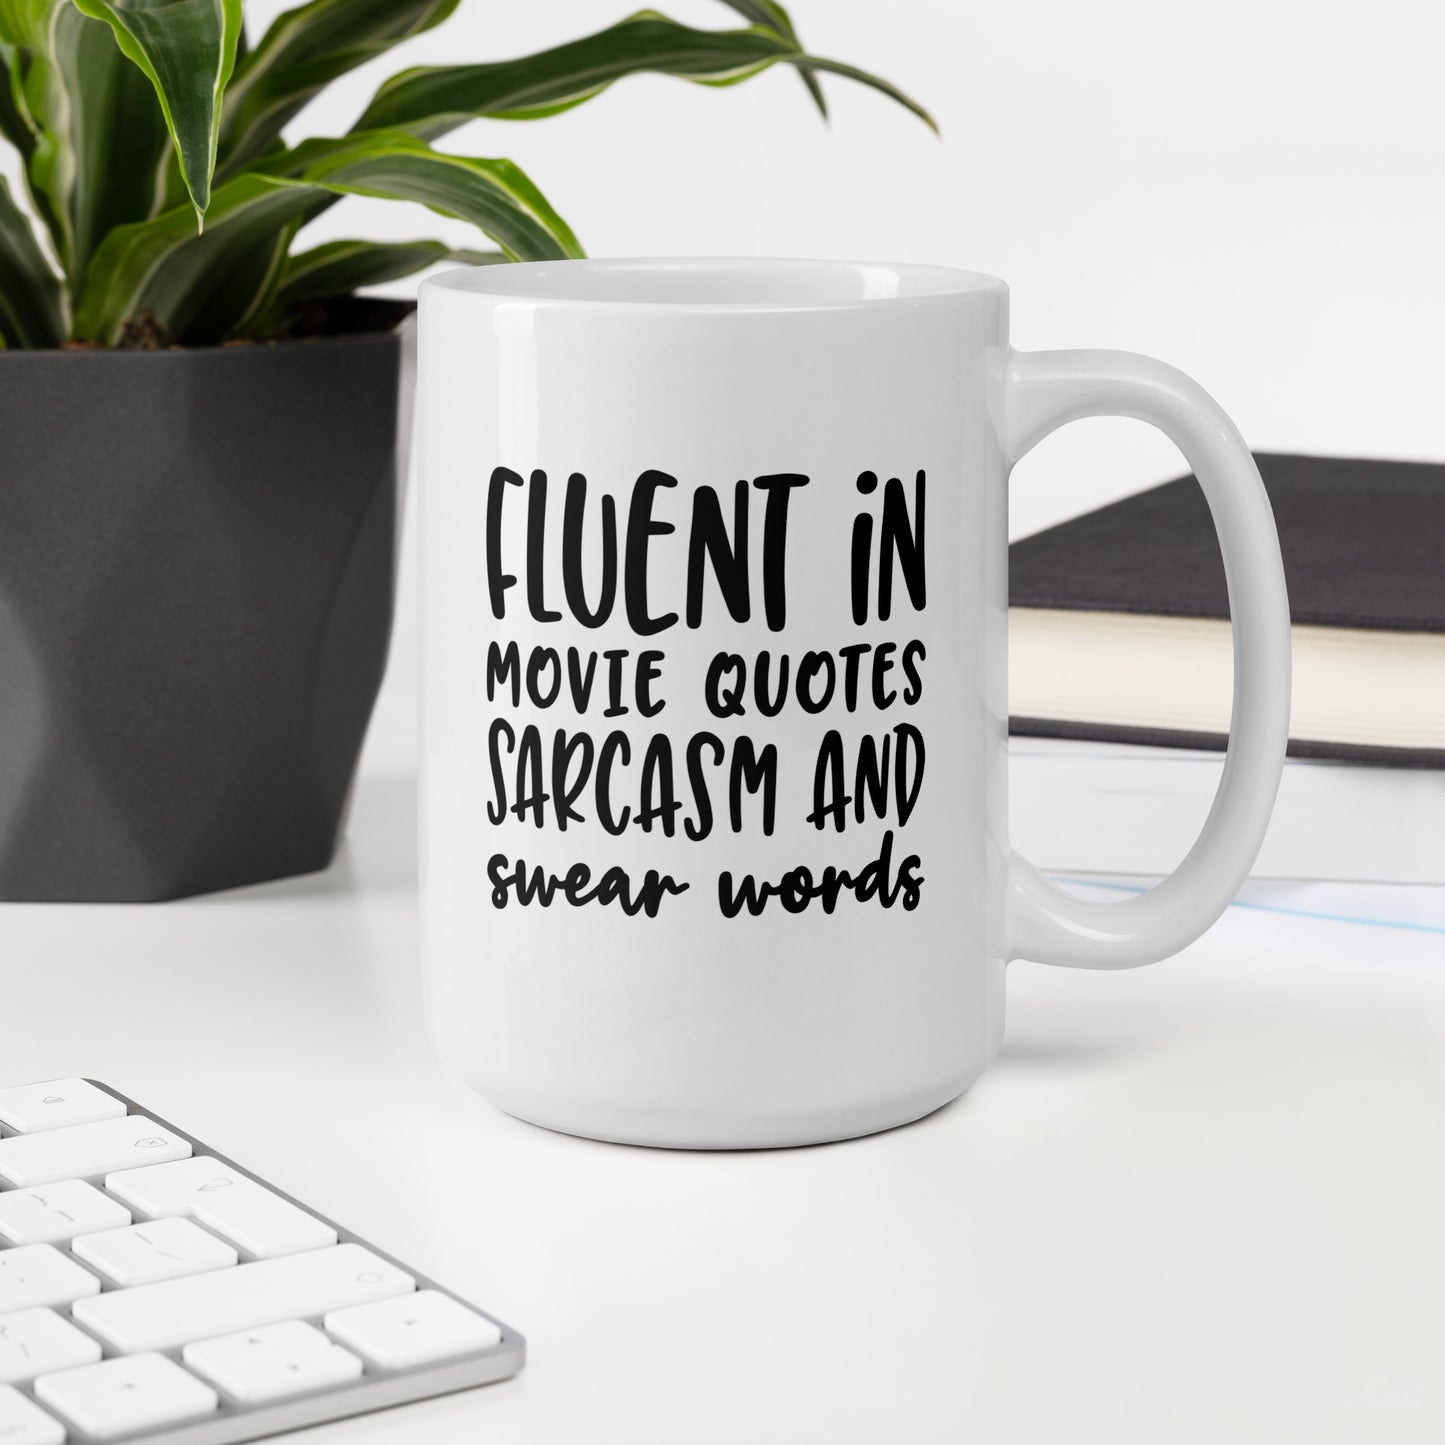 Fluent in Movie Quotes, Sarcasm and Swear Words Coffee Mug